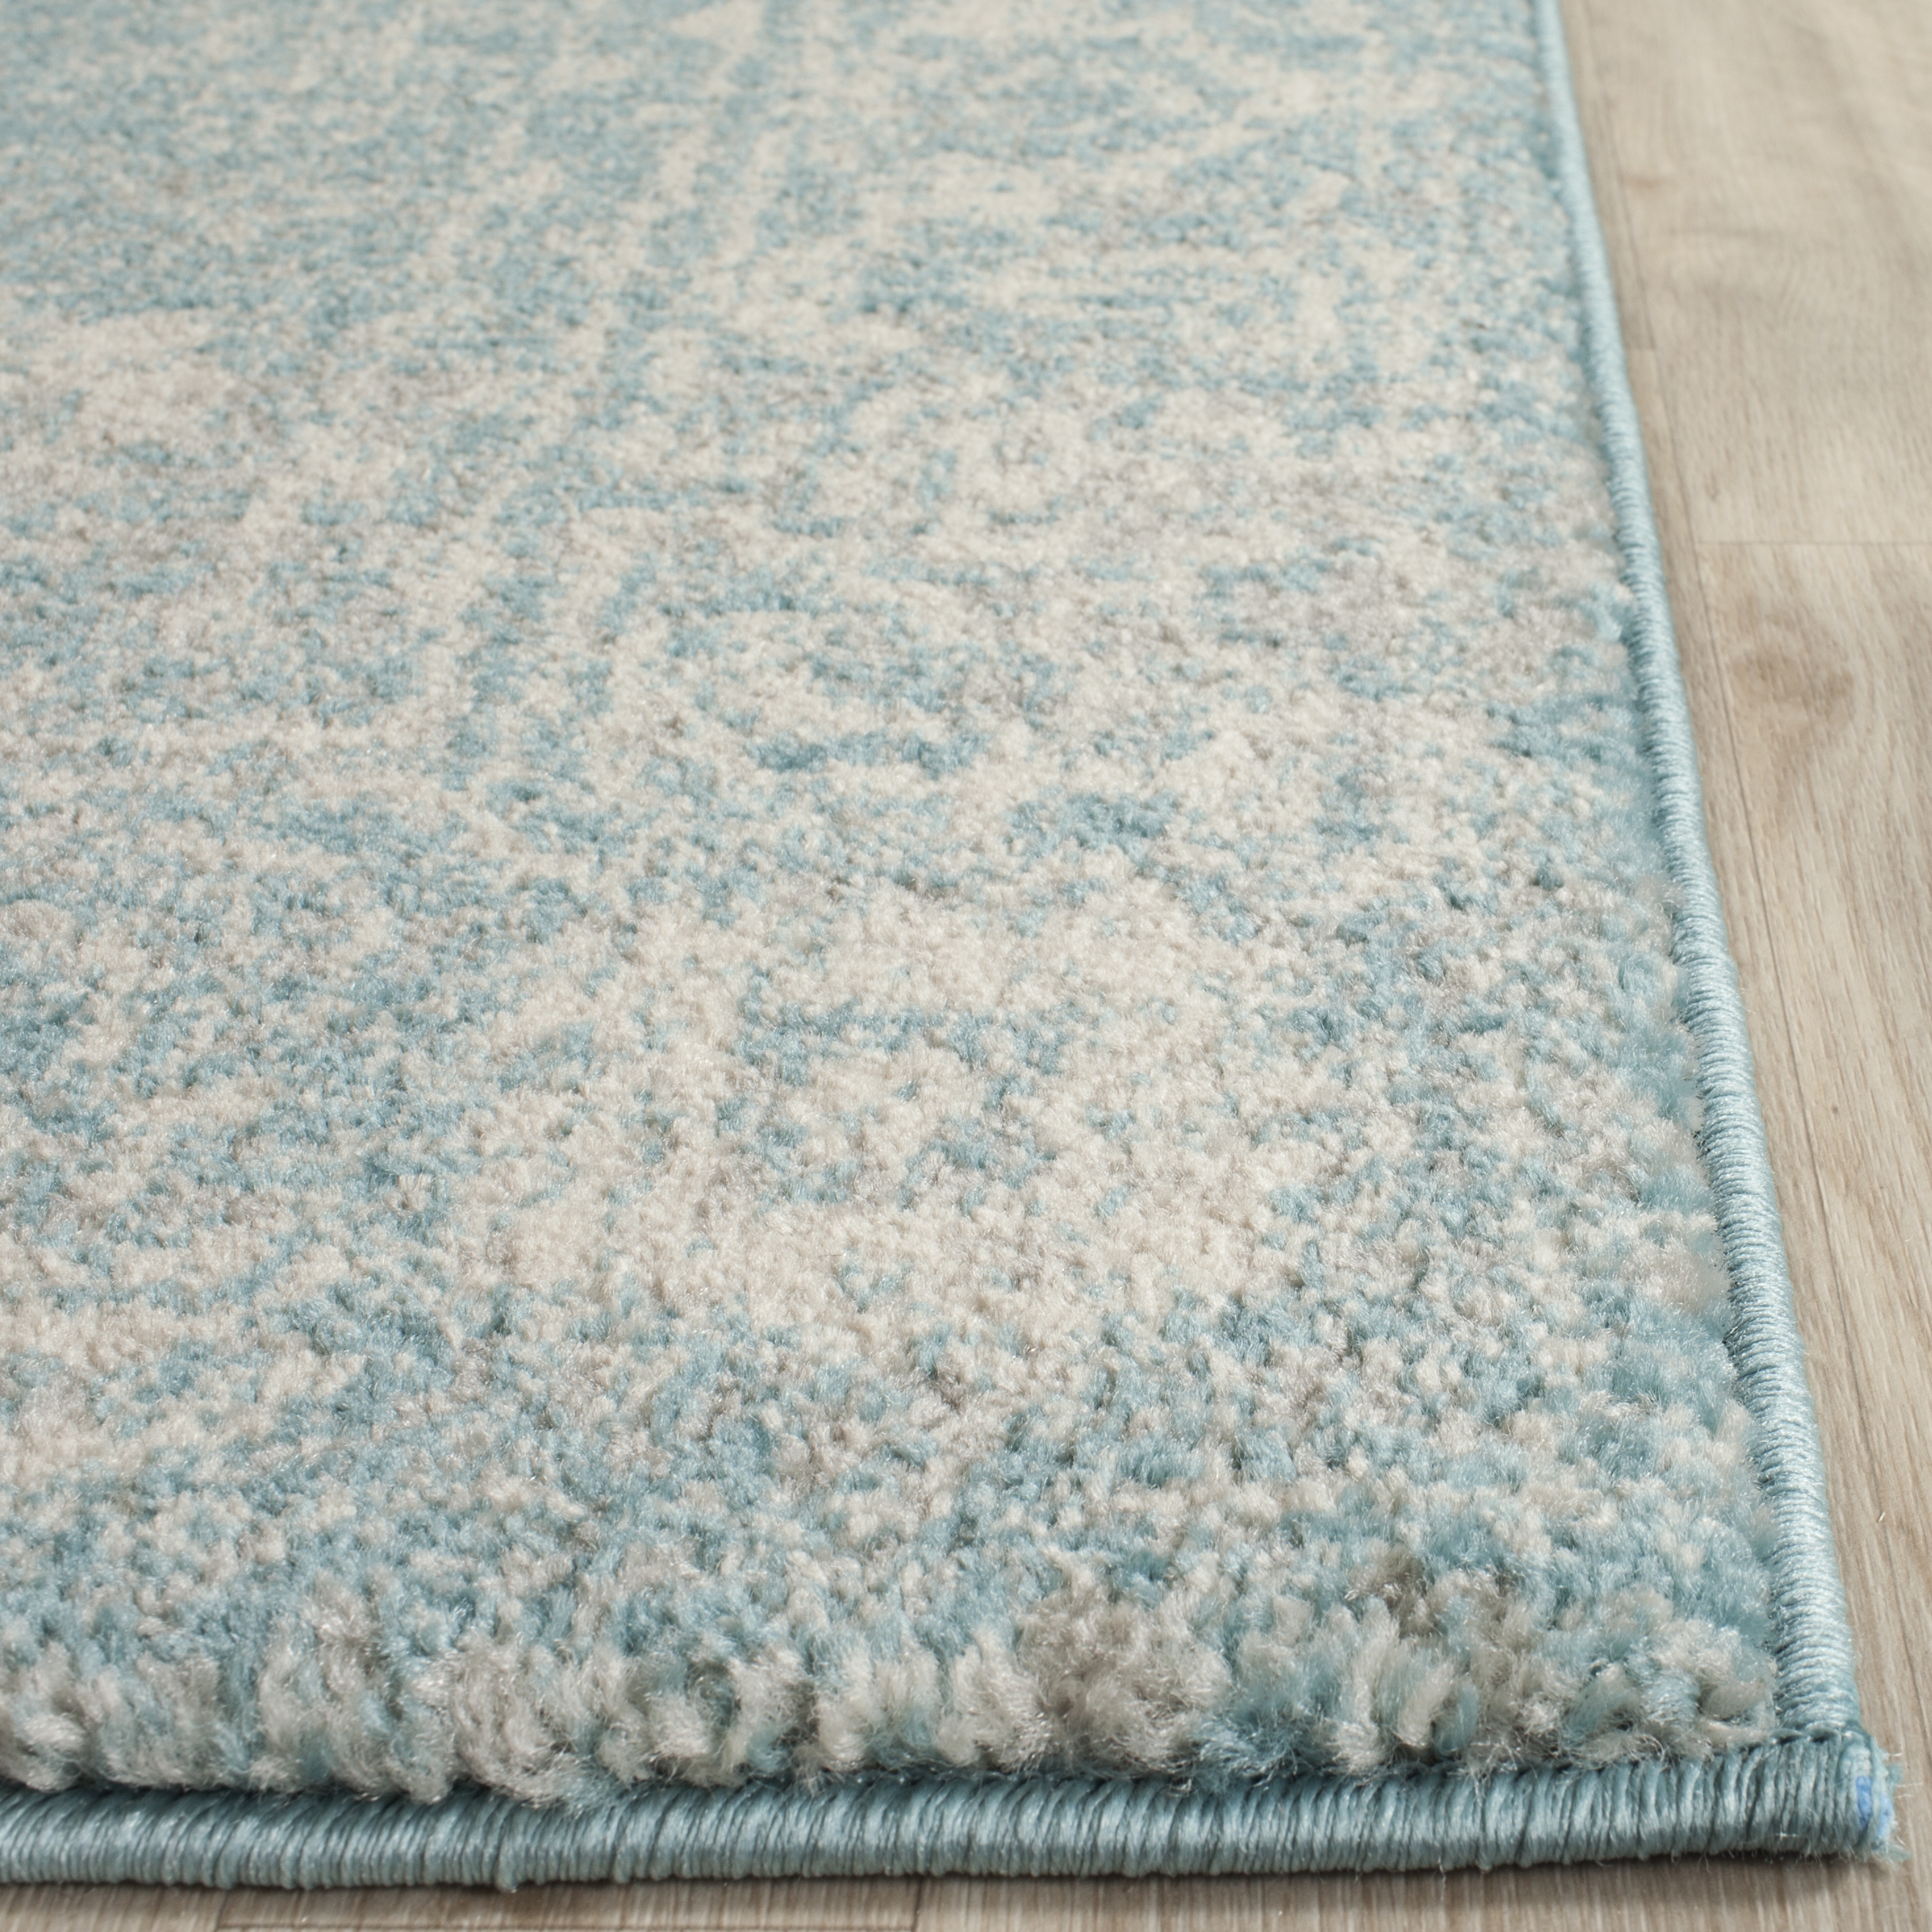 Arlo Home Woven Area Rug, EVK270D, Light Blue/Ivory,  10' X 14' - Image 2